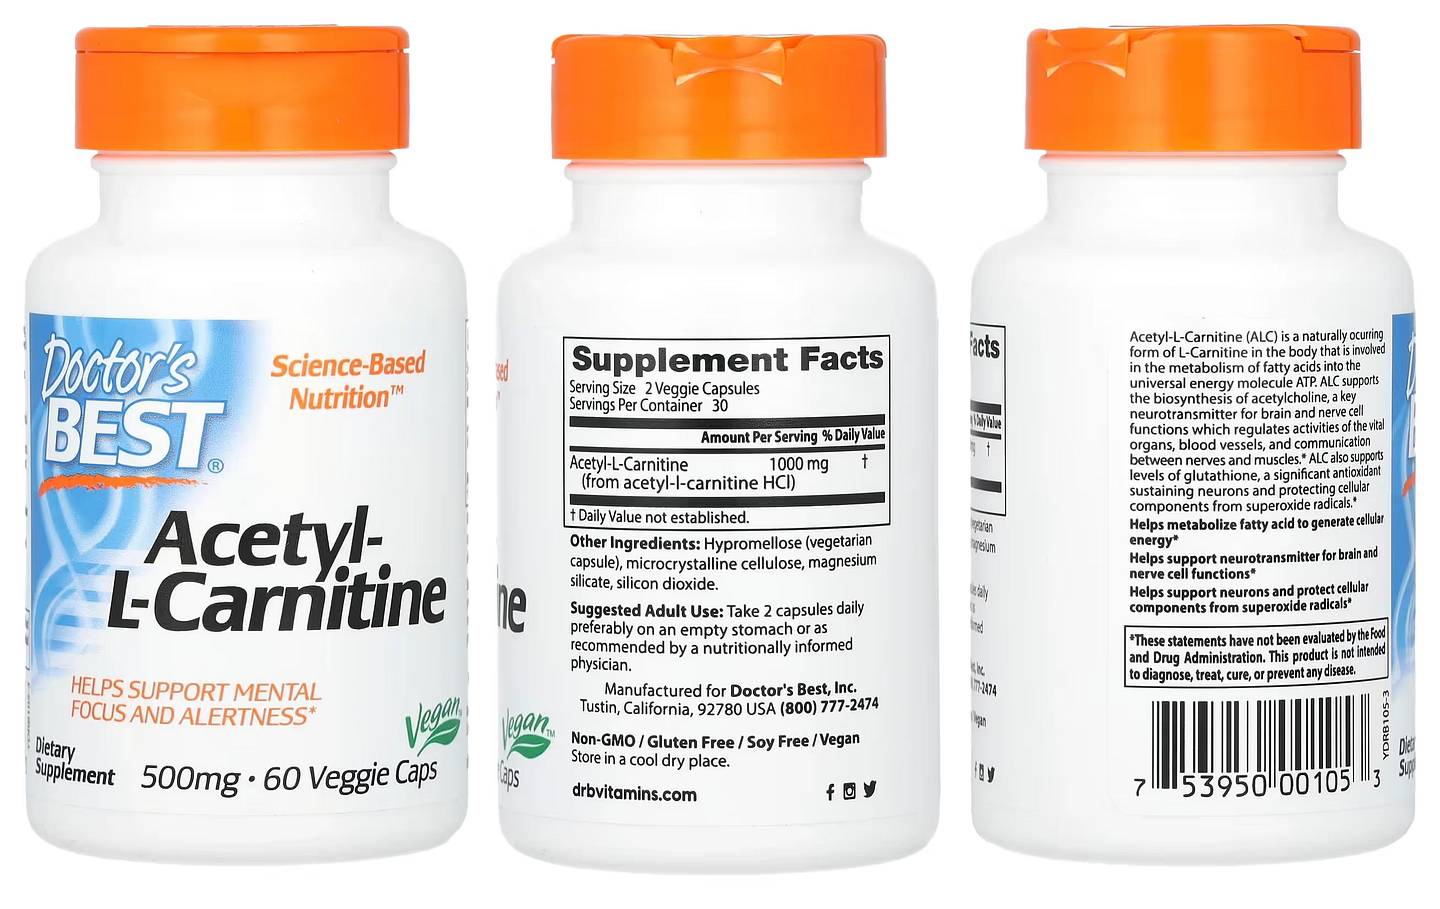 Doctor's Best, Acetyl-L-Carnitine packaging